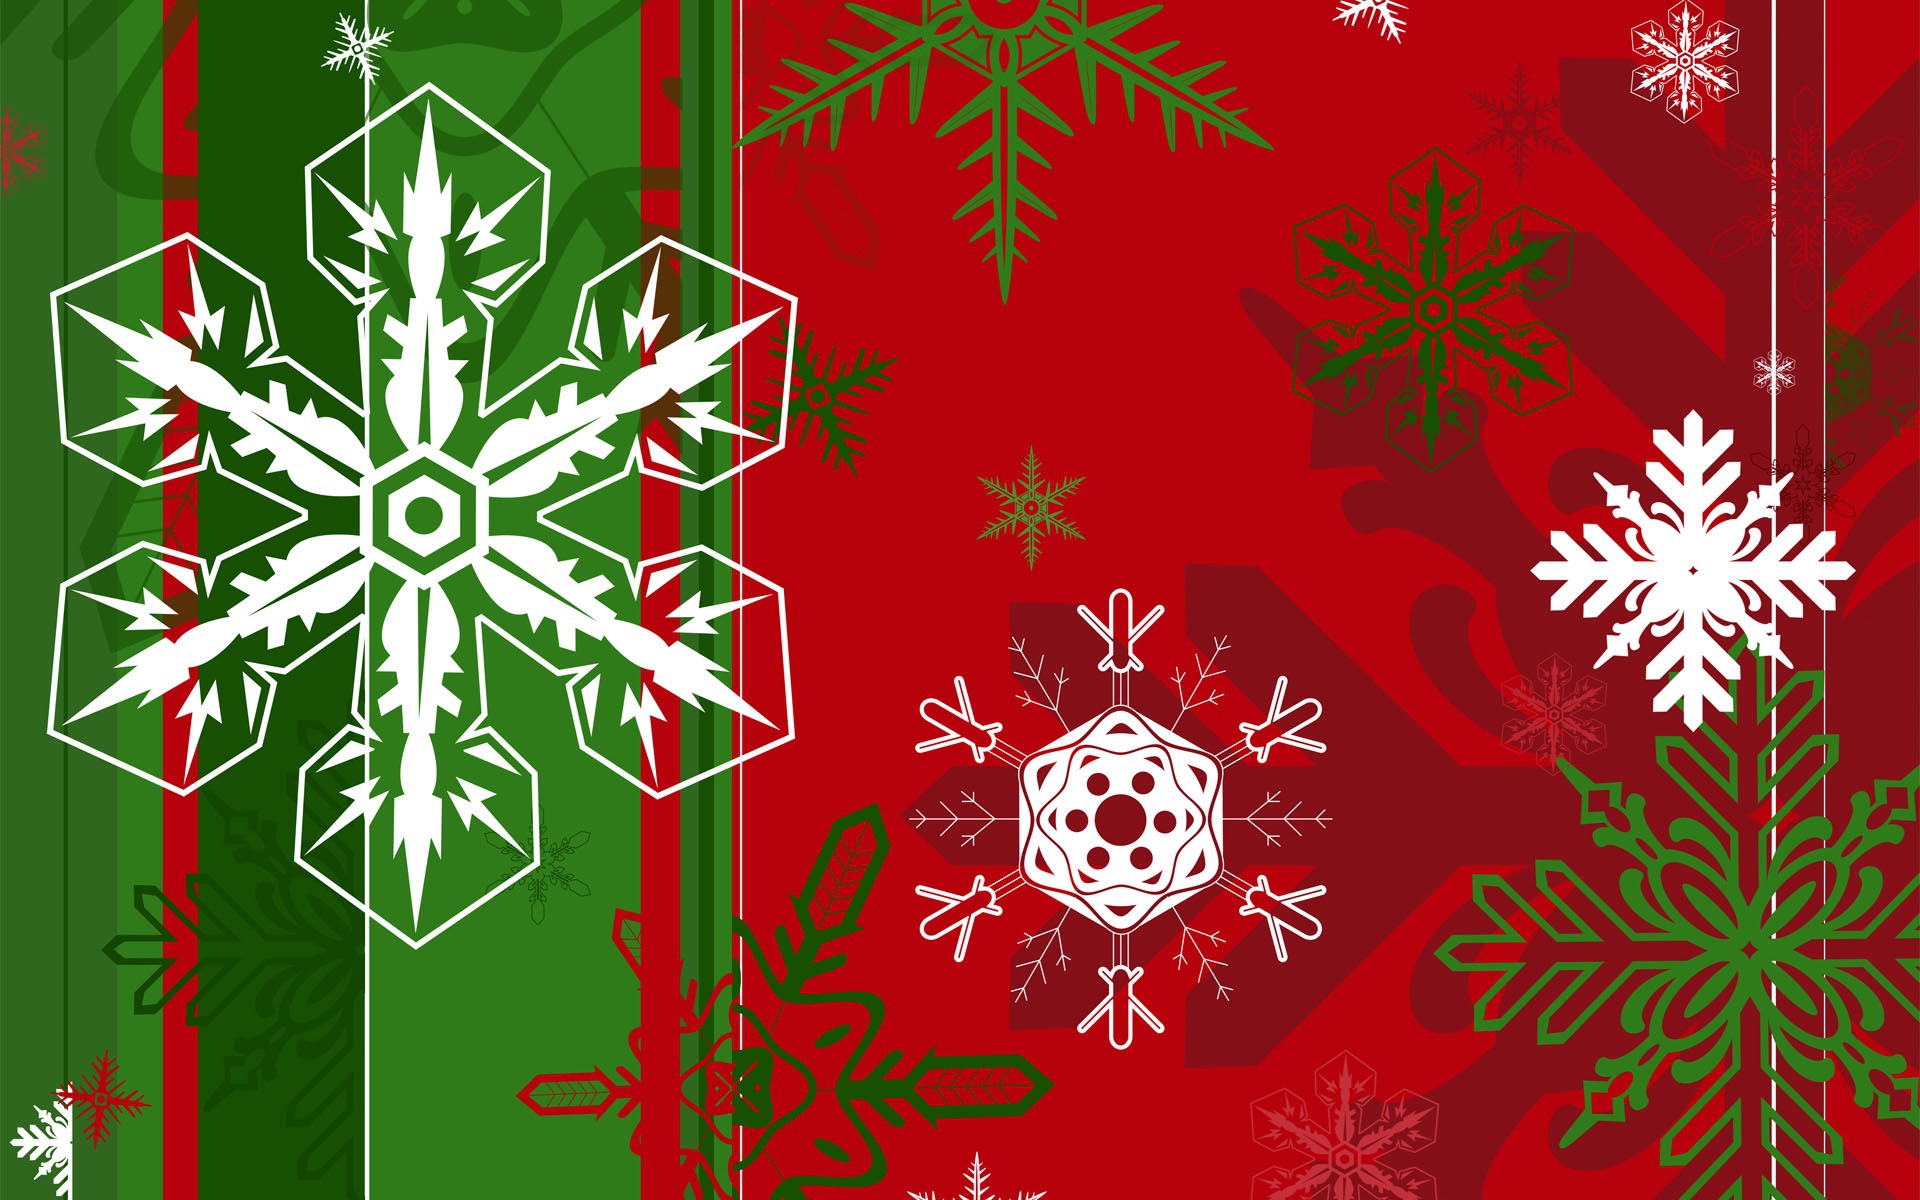 Snowflakes of different shapes on the green and red background on Christmas Desktop wallpaper 1920x1200